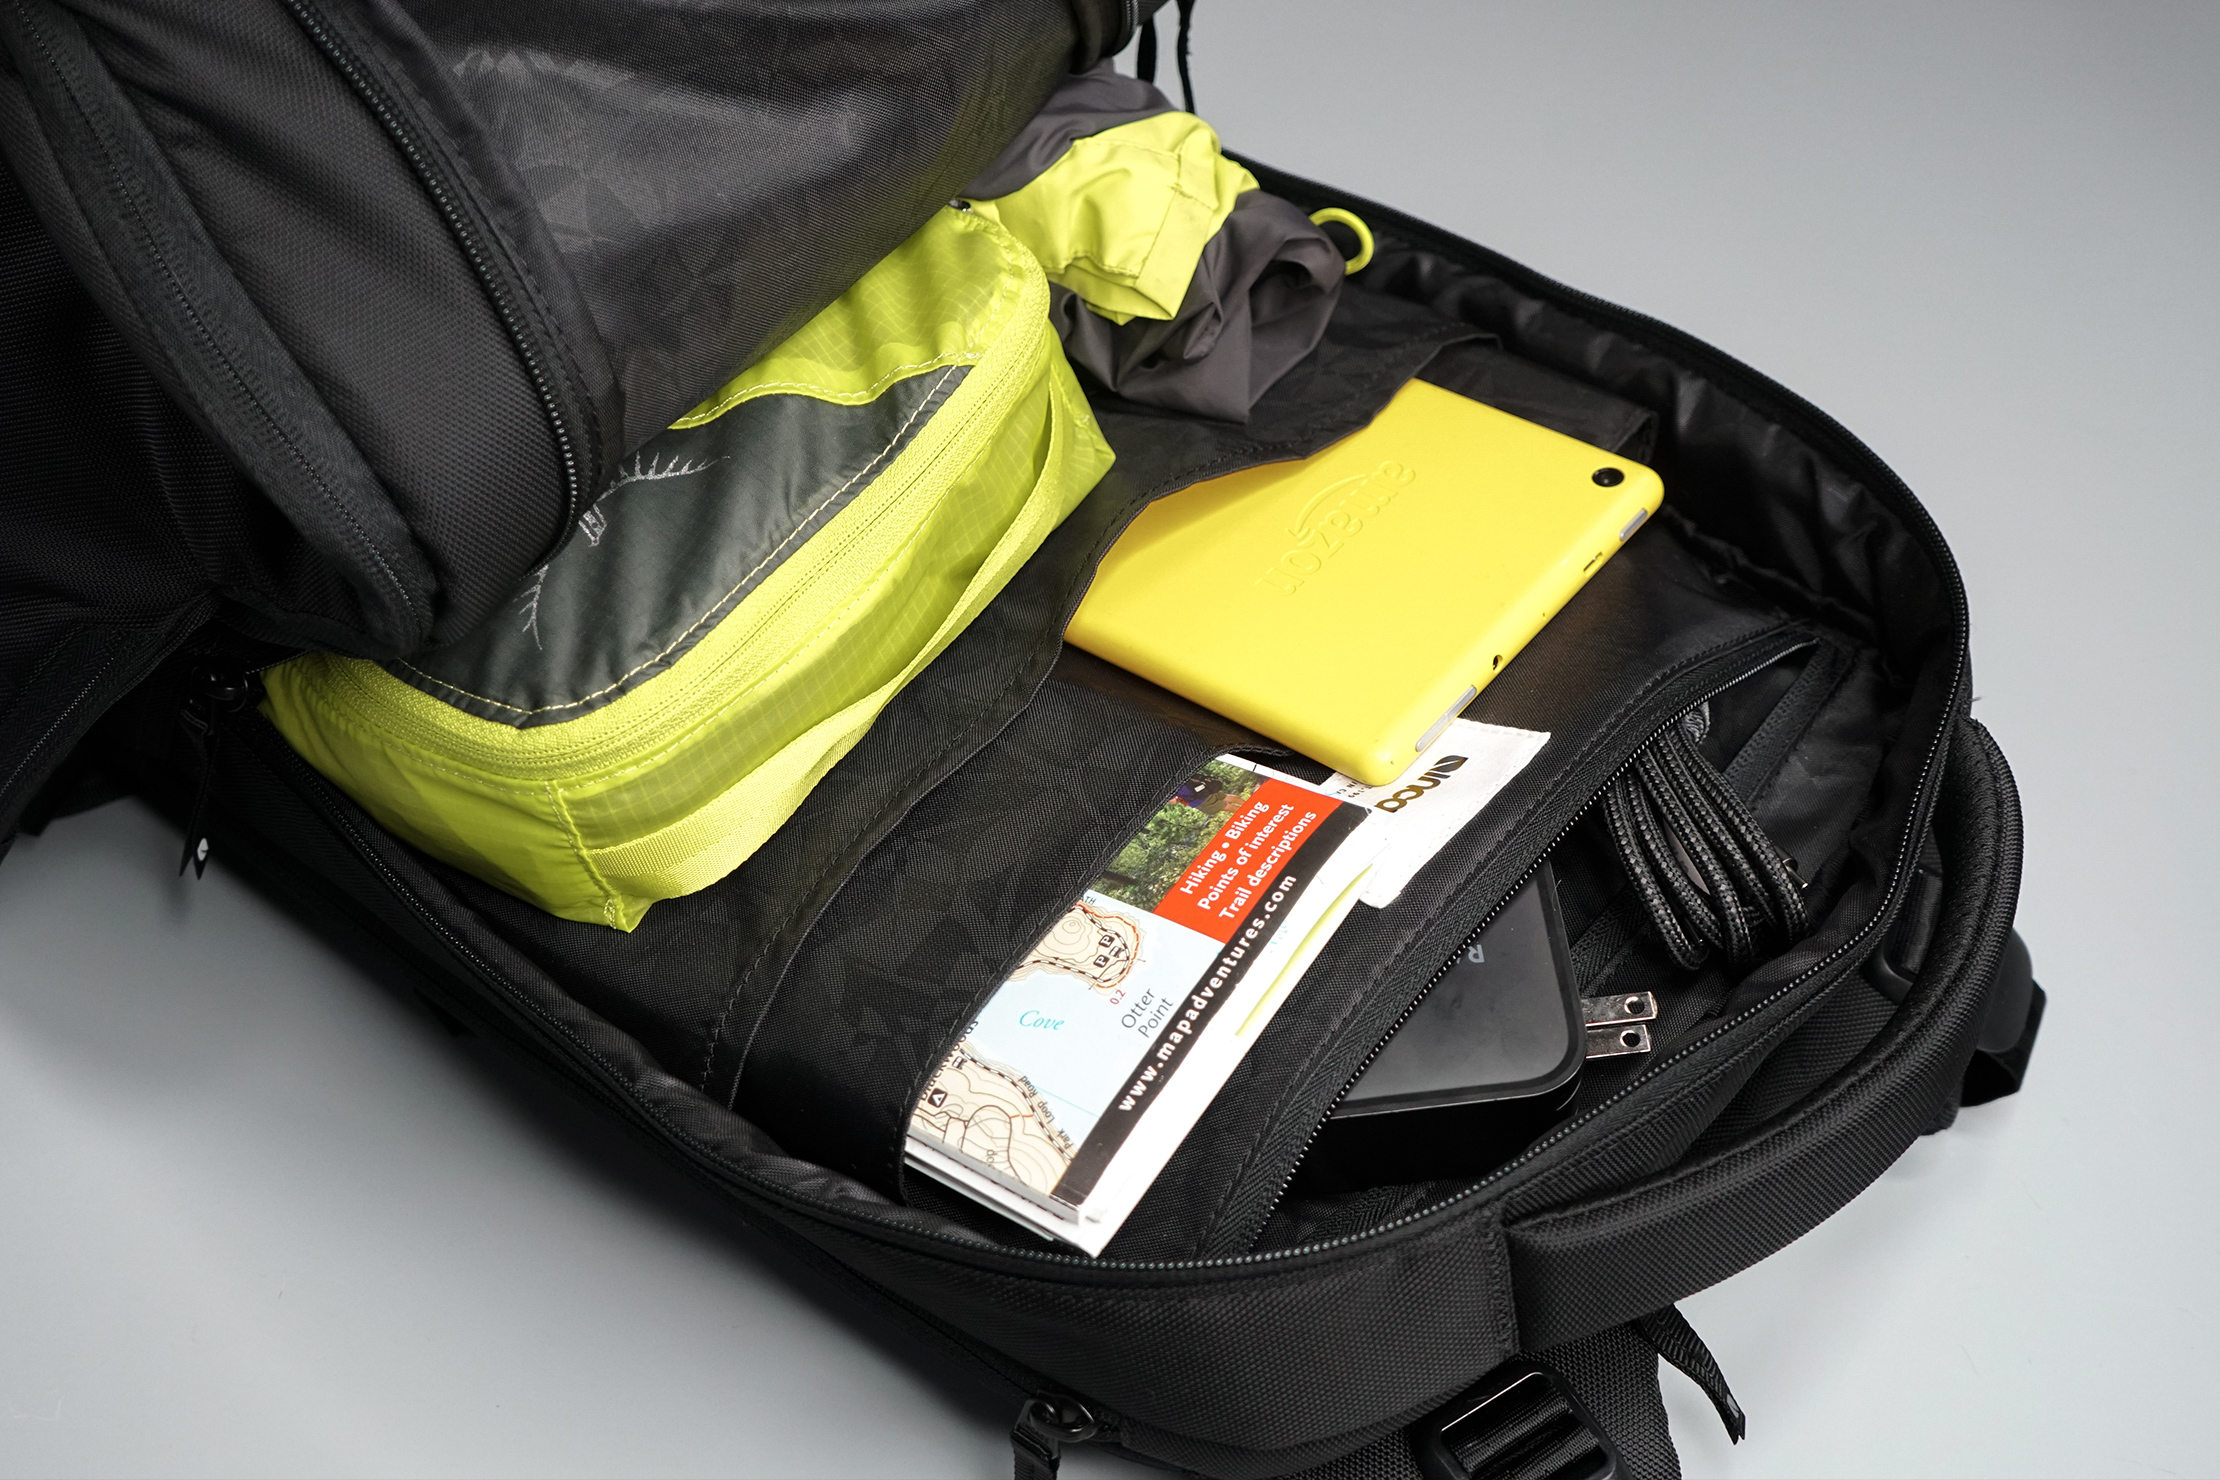 Incase ICON Backpack Main Compartment